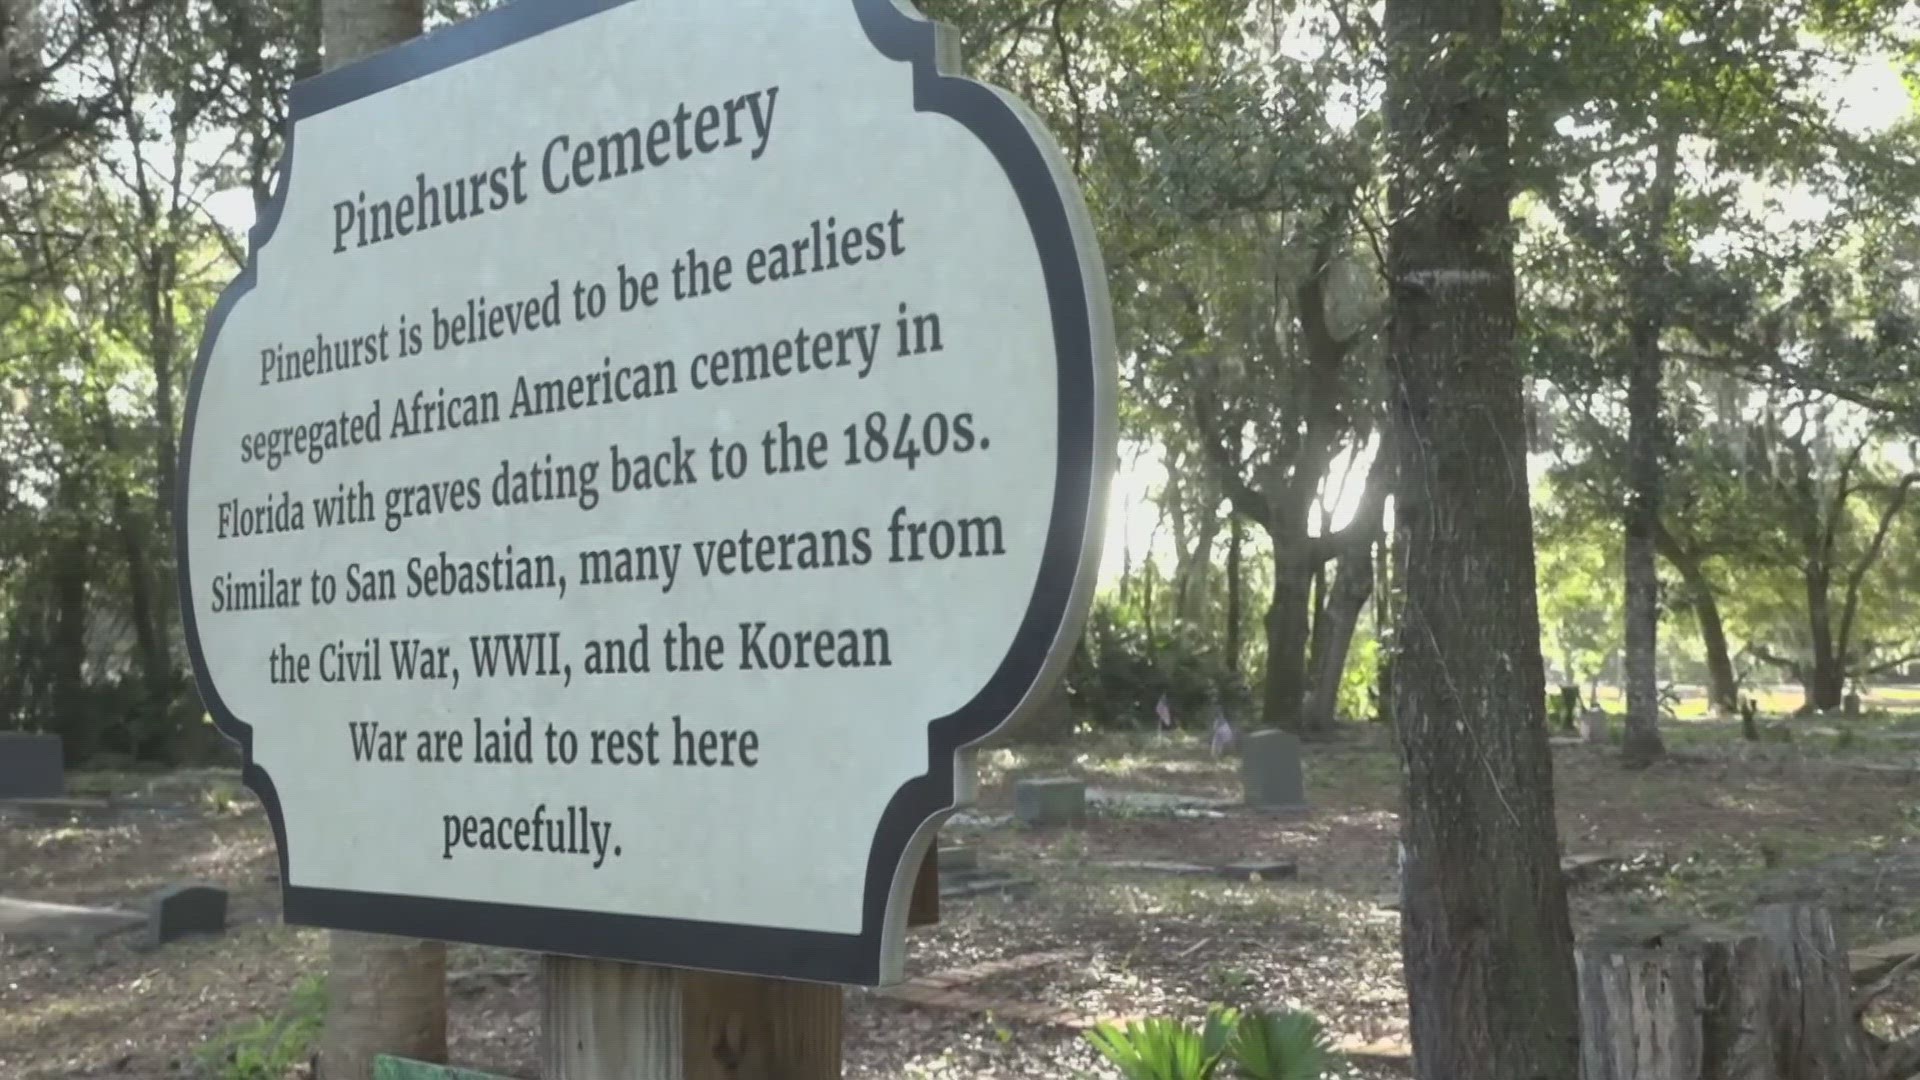 Pinehurst Cemetery in St. Augustine is believed to be one of the earliest segregated gravesites in Florida.